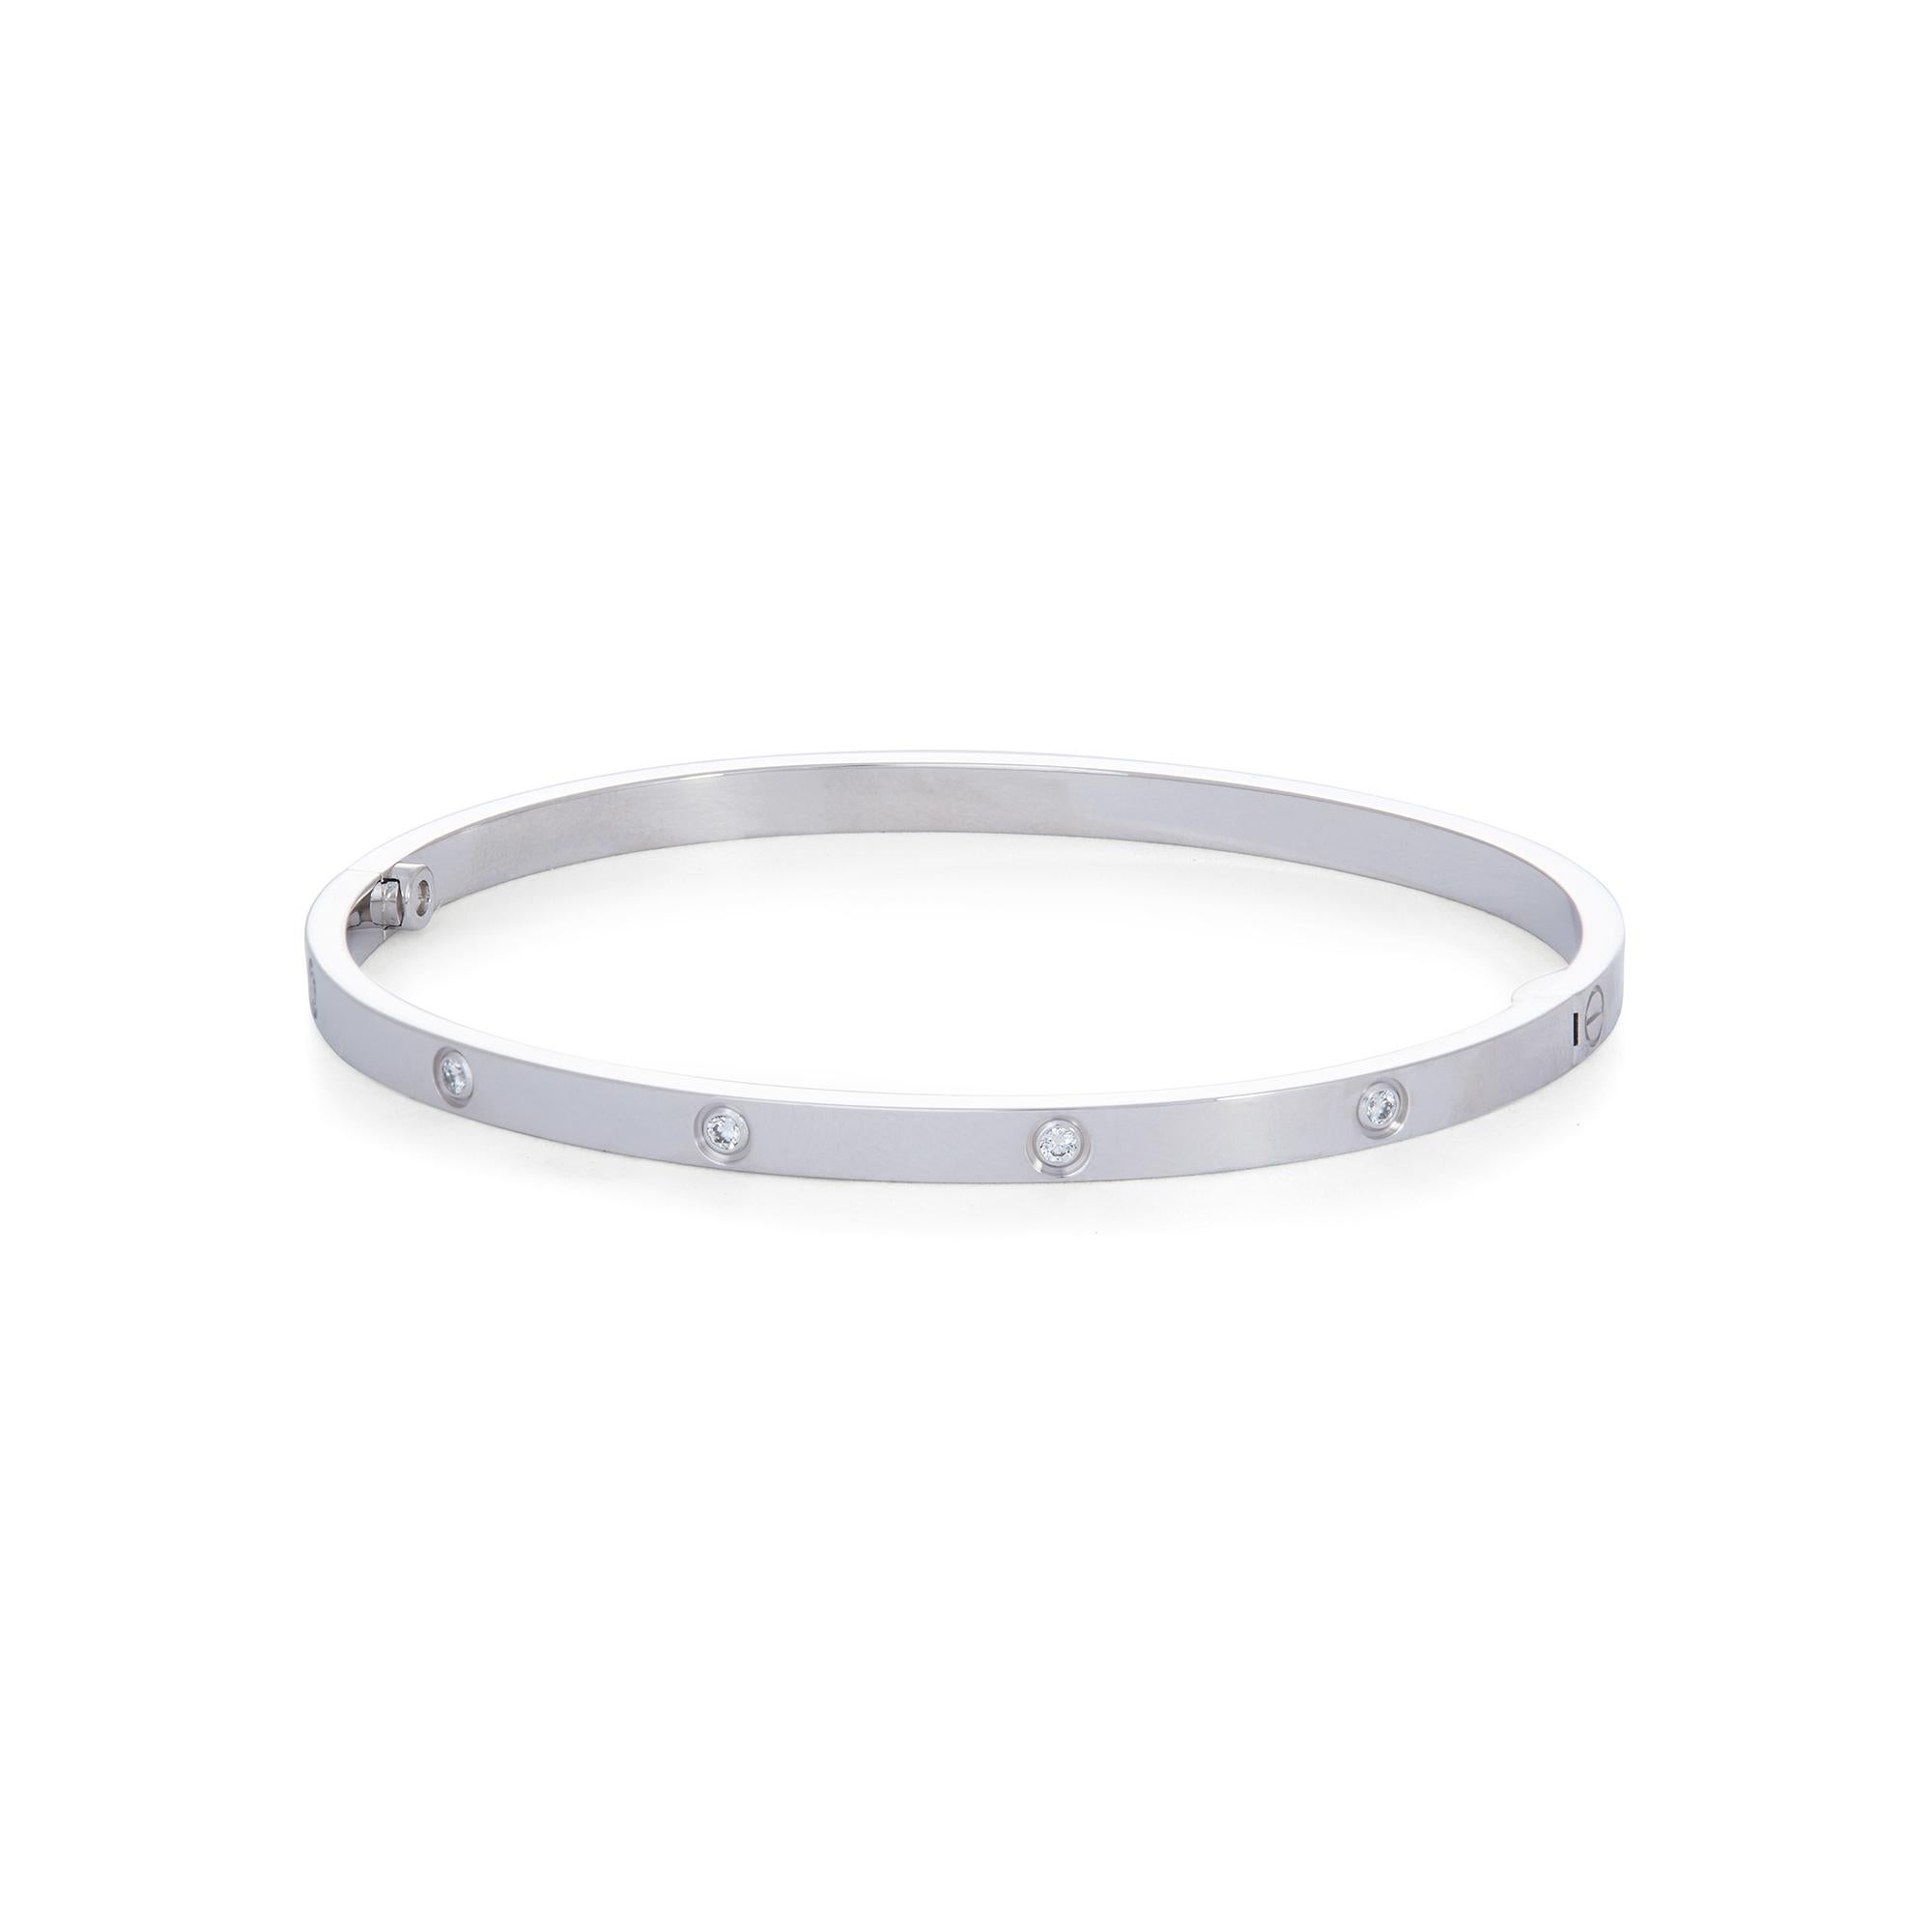 Authentic Cartier 'Love' bracelet crafted in 18 karat white gold is set with ten round brilliant cut diamonds (E-F, VS) weighing 0.21 carats total. Size 18.  Signed Cartier, Au750, 18, with serial number and hallmark. The bracelet is presented with